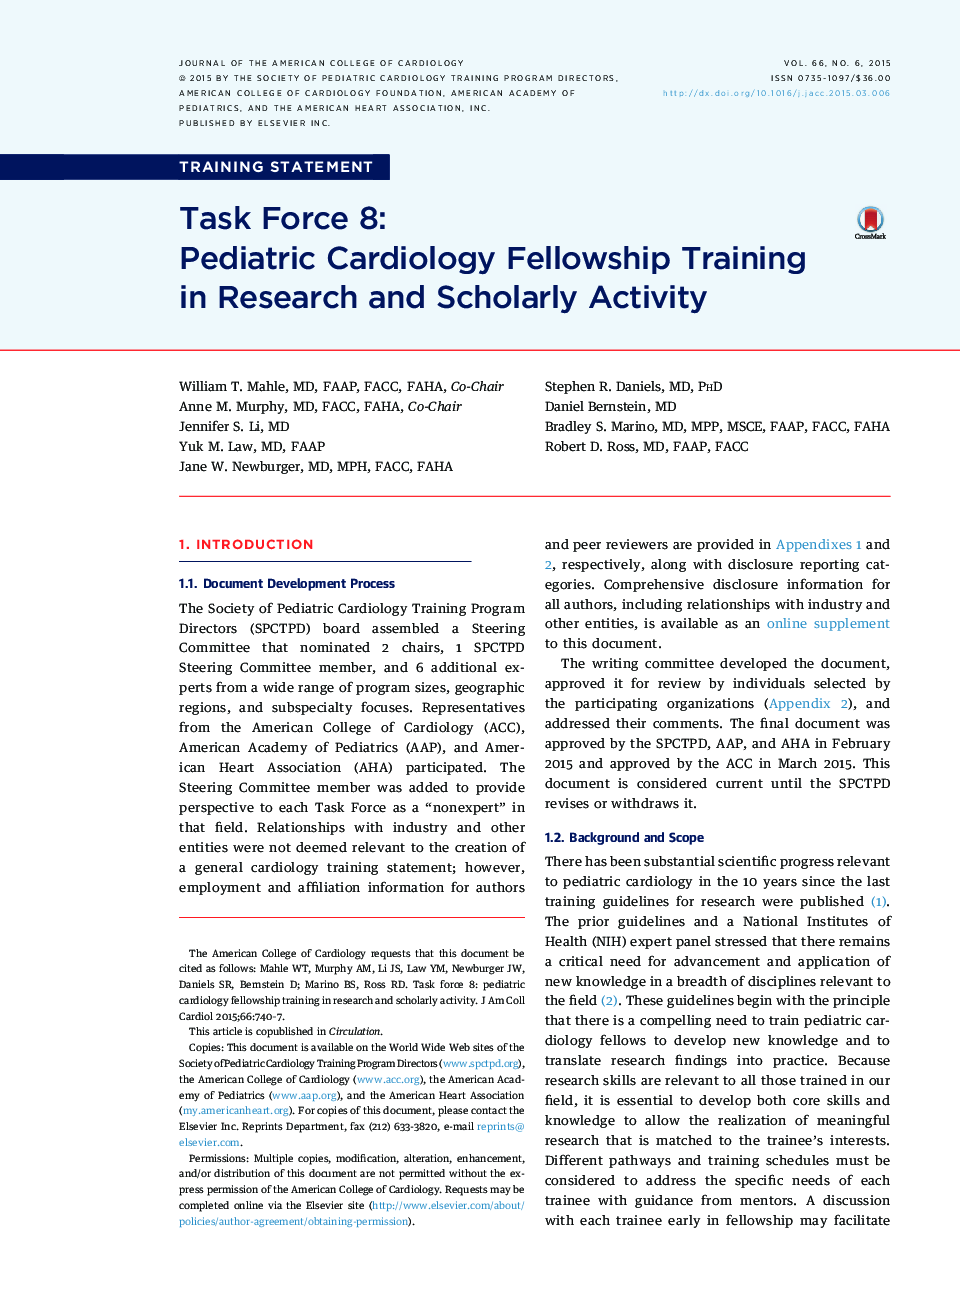 Task Force 8: Pediatric Cardiology Fellowship Training in Research andÂ Scholarly Activity